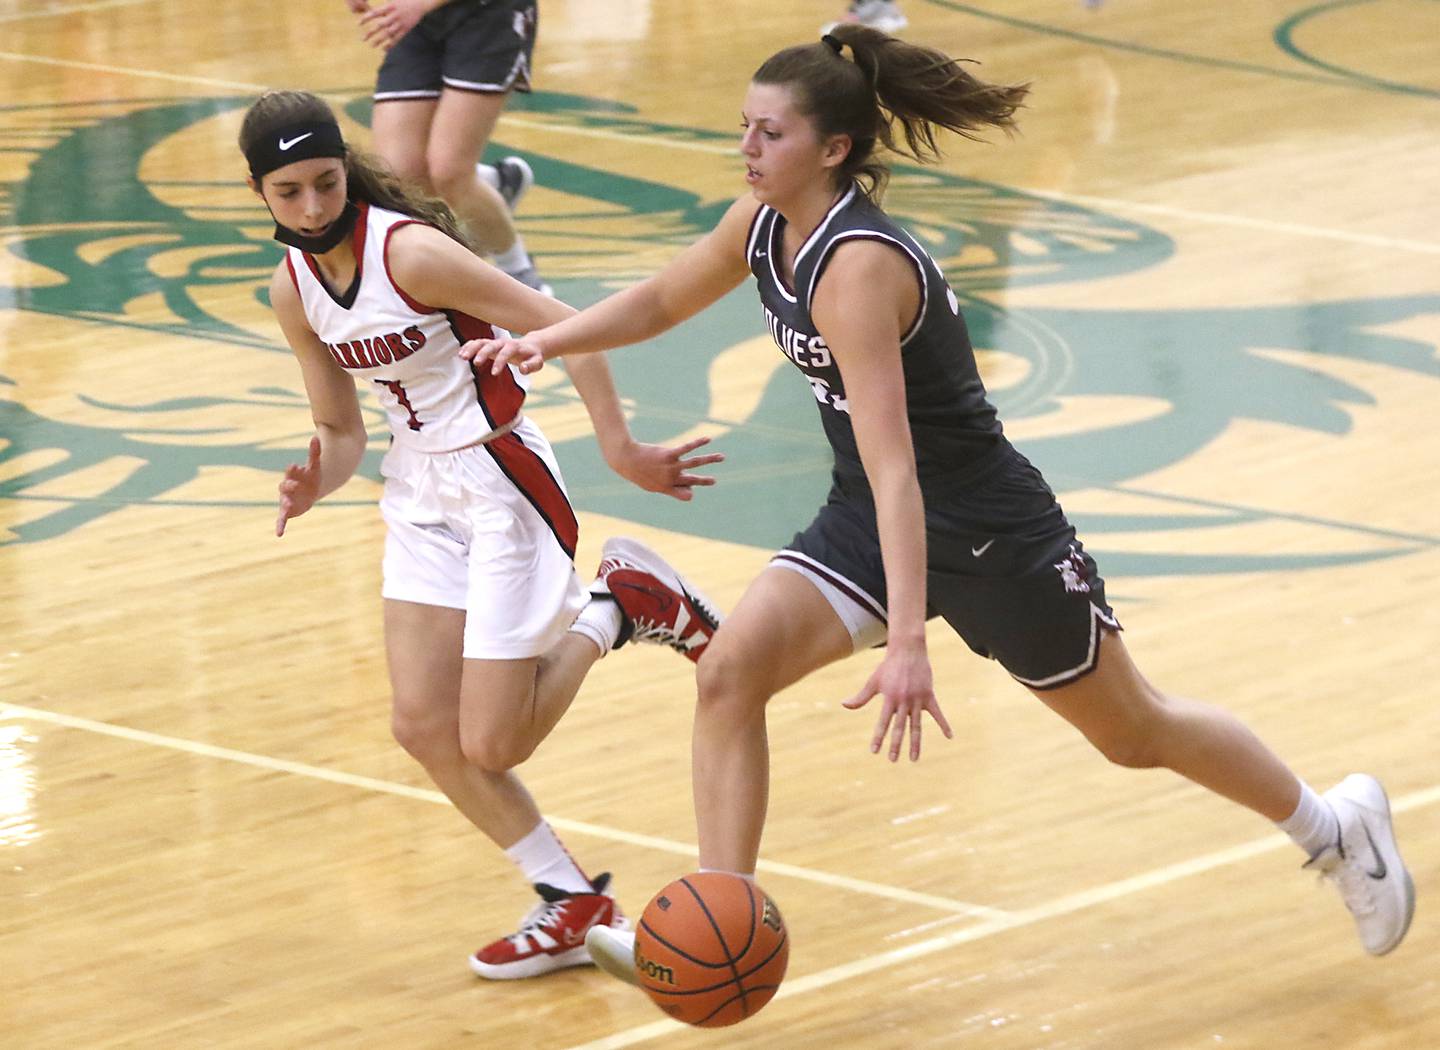 Prairie Ridge's Karsen Karlblom pushes the ball up the court against the defense of Deerfield's Nikki Kerstein during a IHSA Class 3A Grayslake Central Sectional semifinal basketball game Tuesday evening, Feb. 22, 2022, between Prairie Ridge and Deerfield at Grayslake Central High School.